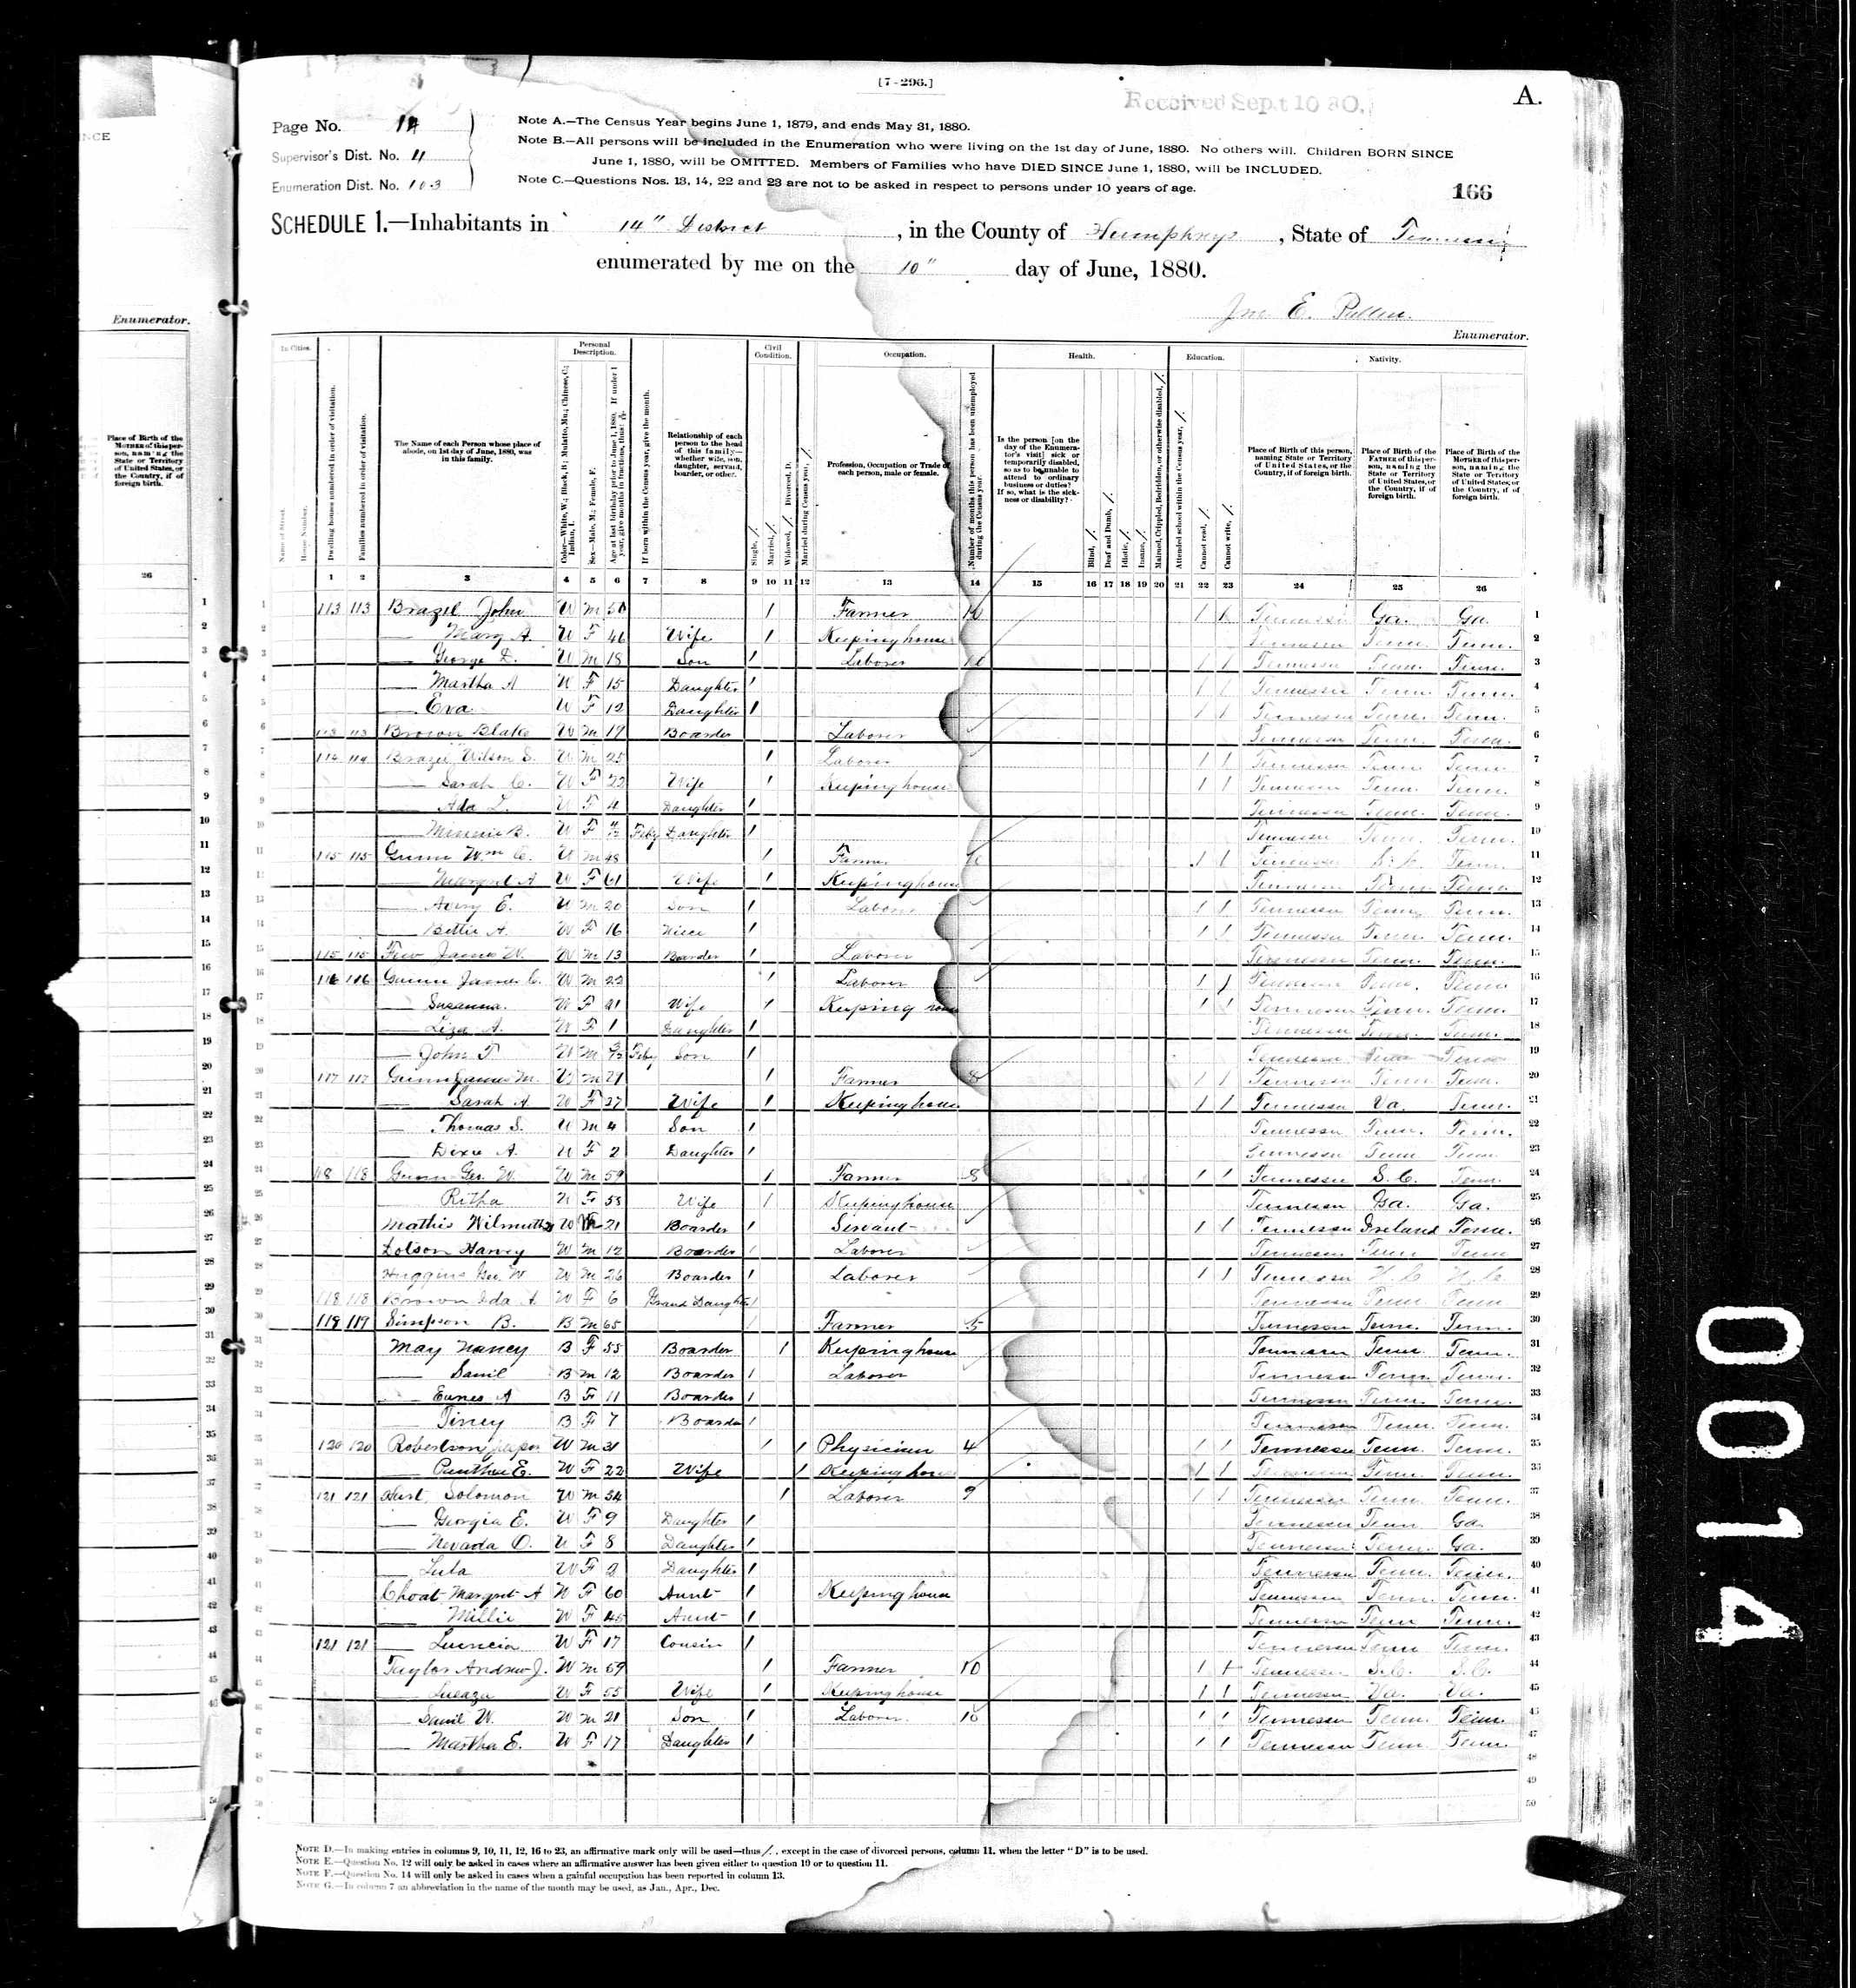 John Brazzell, 1880 Humphreys County, Tennessee, census